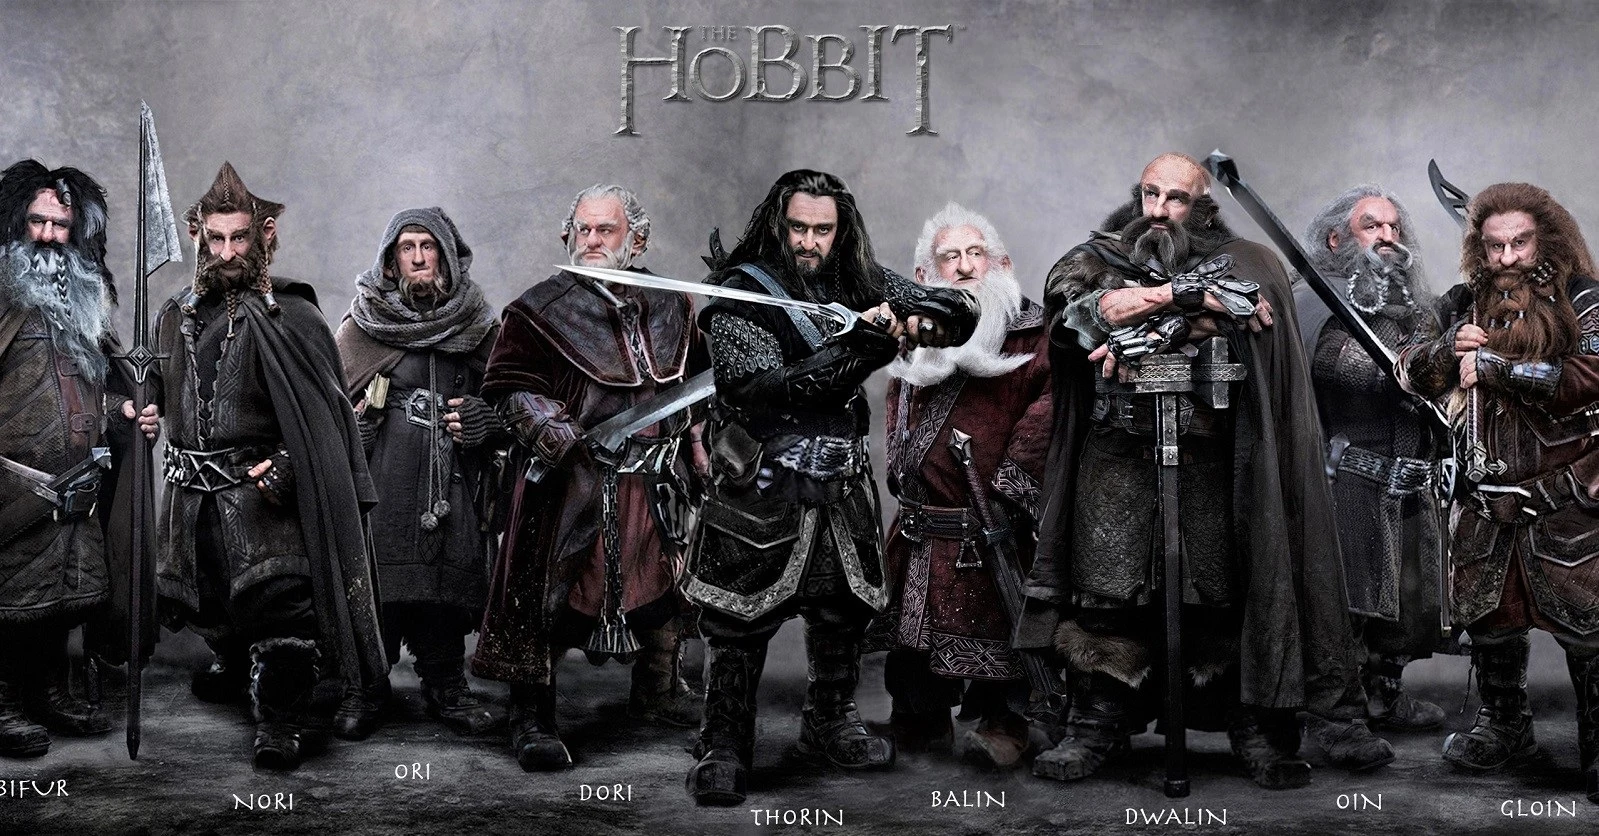 13 Dwarves & Thorin’s Company from The Hobbit (History & Overview)